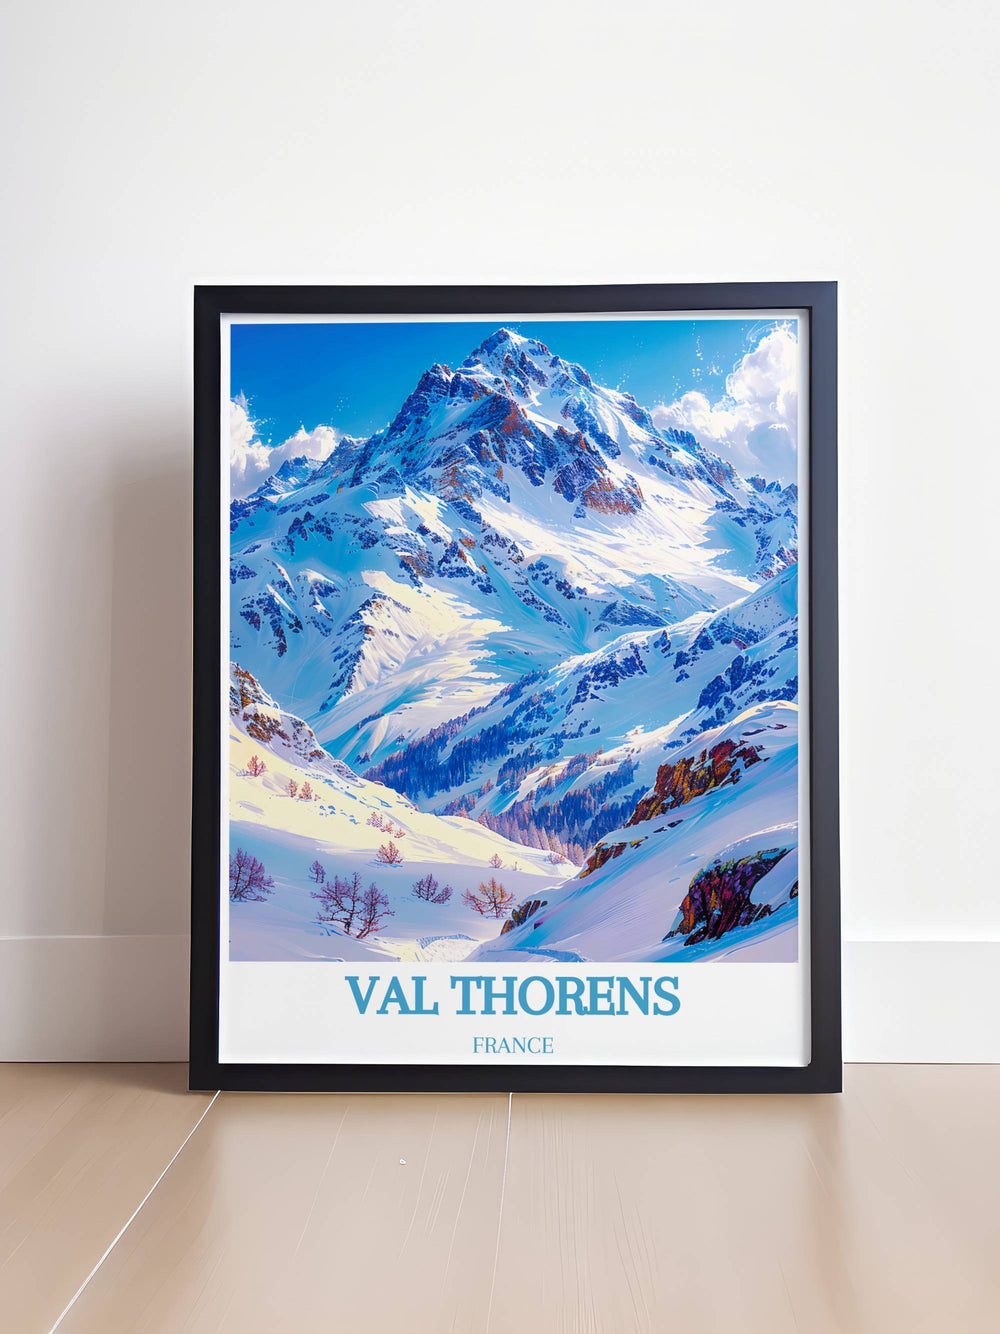 Val Thorens framed art showcasing the breathtaking landscapes of Cime Caron in the French Alps. Perfect for enhancing your living space with the serene beauty and elegance of this iconic ski resort.